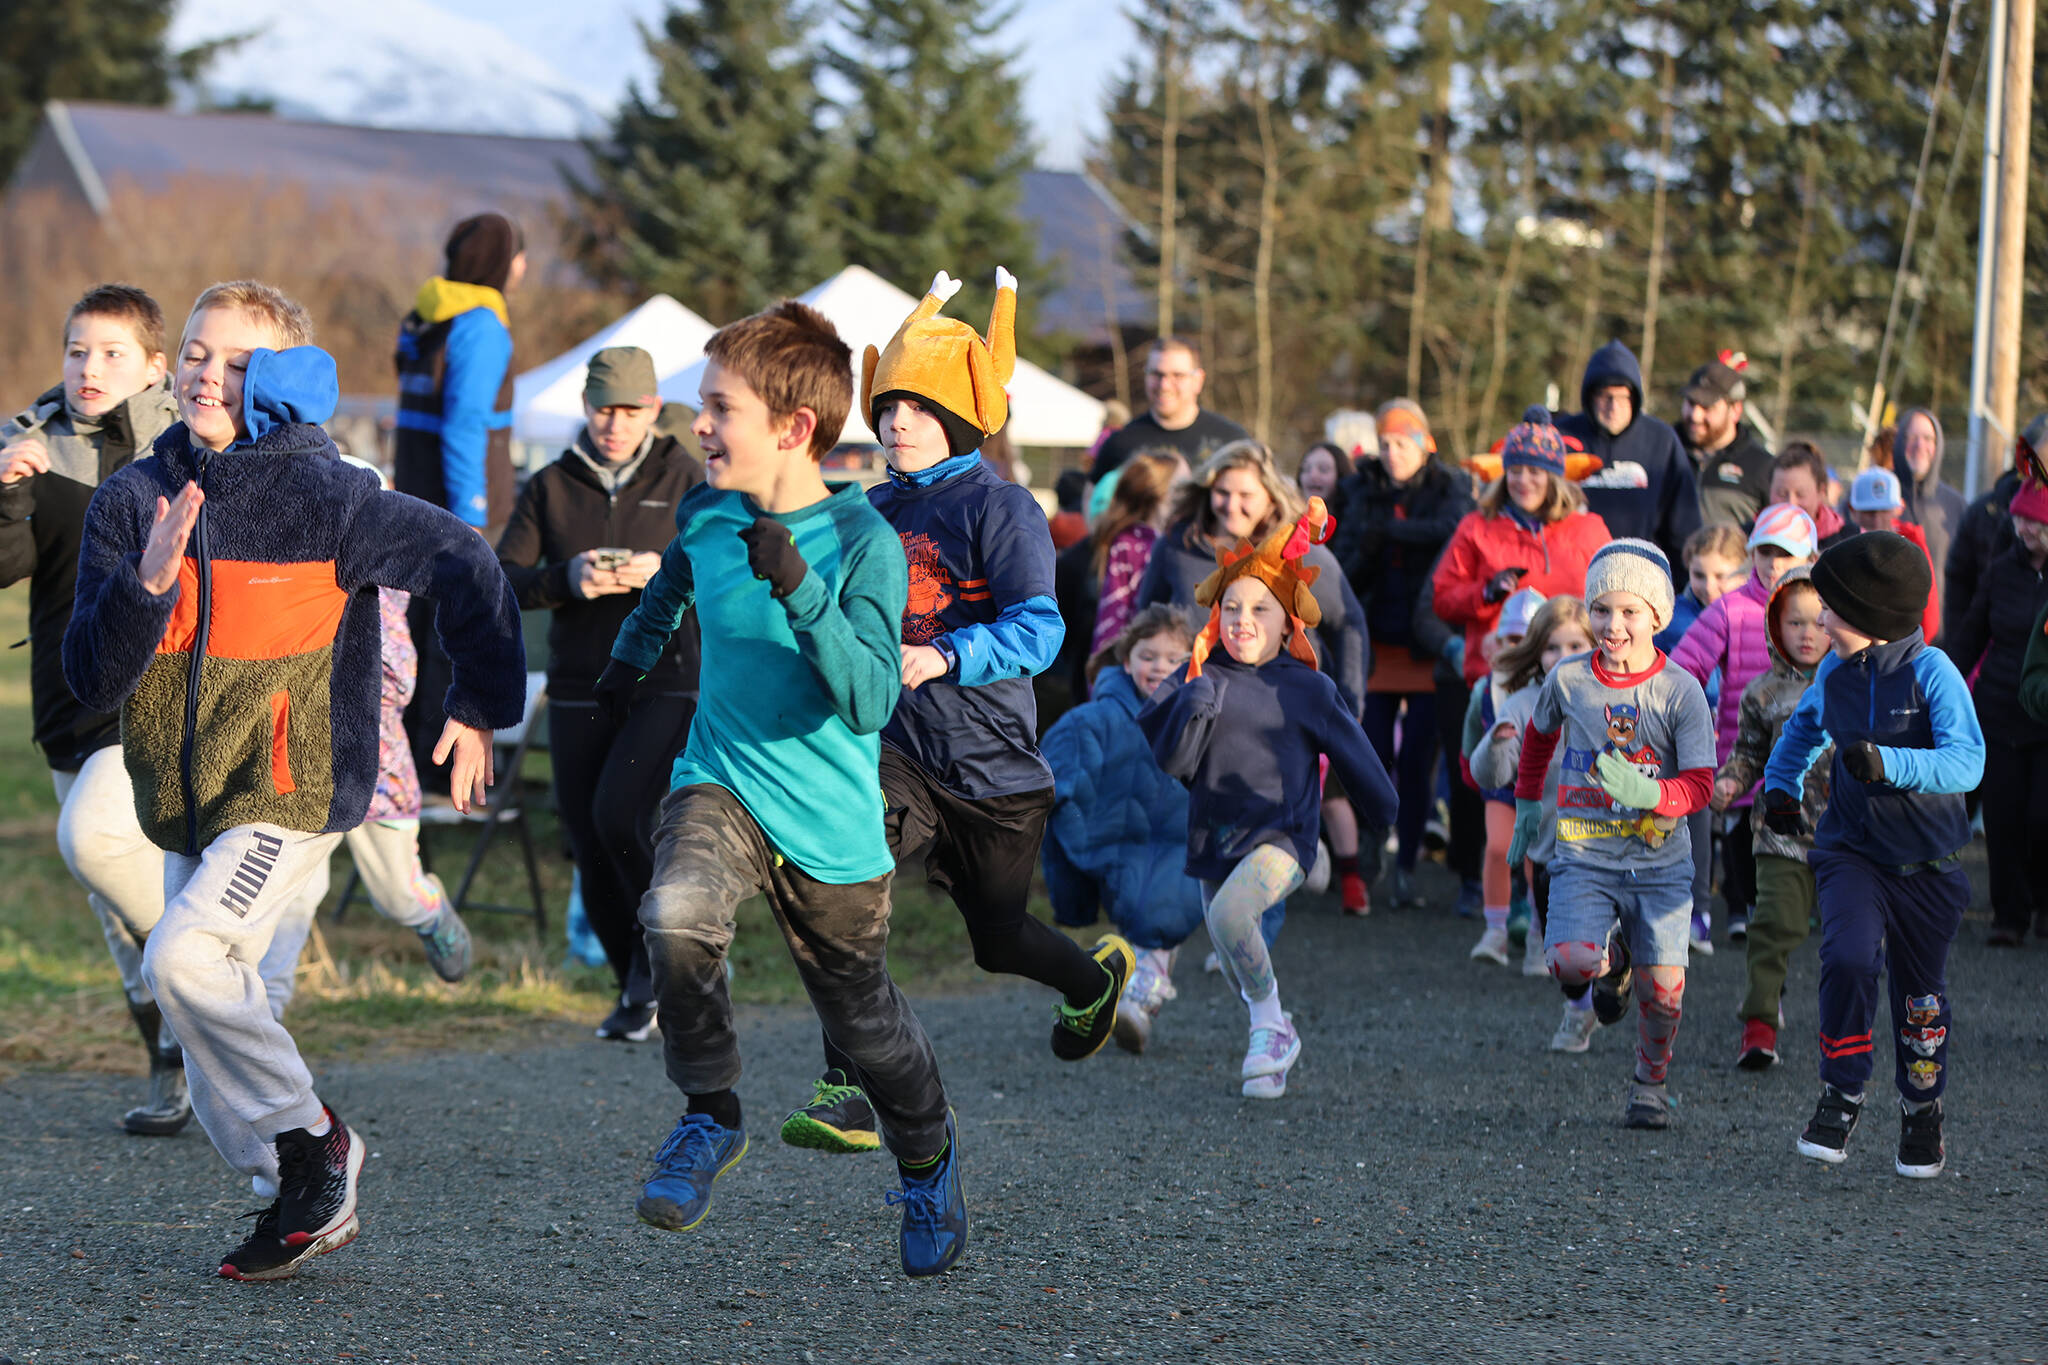 Mile runners takeoff from the starting line during the ninth annual Turkey Trot on Thursday. (Ben Hohenstatt / Juneau Empire)